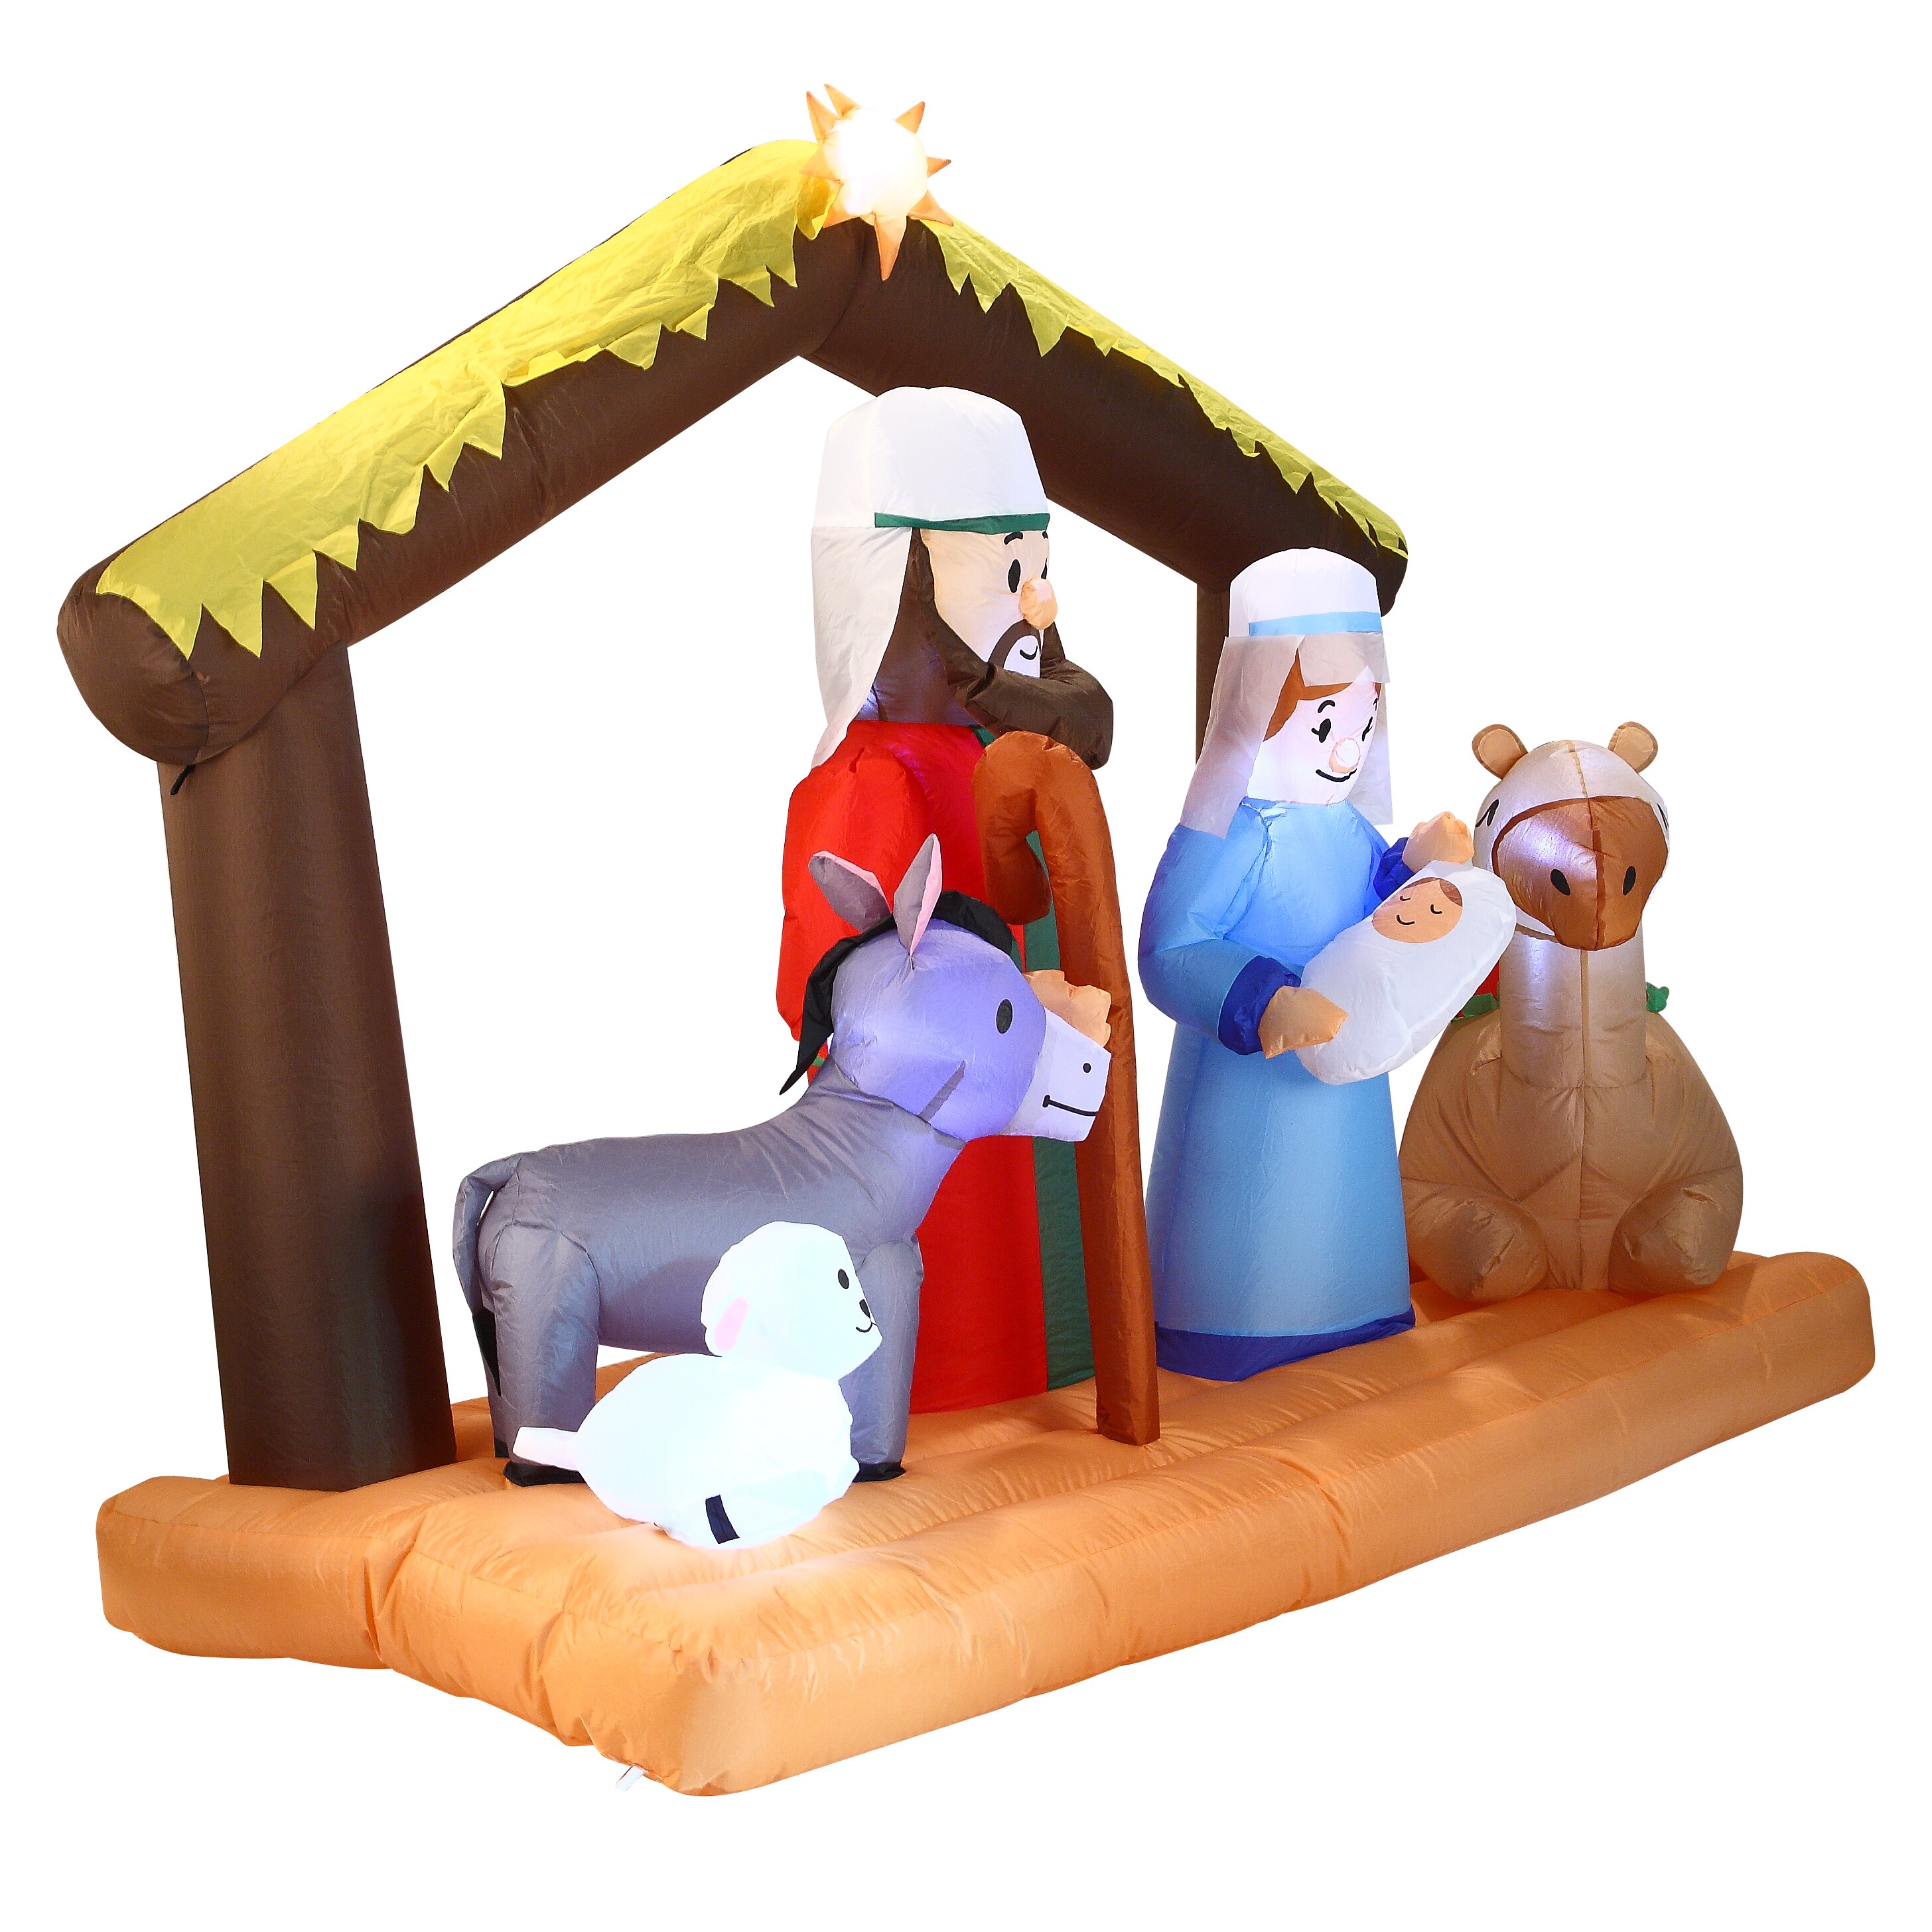 Joiedomi 4-ft Lighted Nativity Christmas Inflatable at Lowes.com